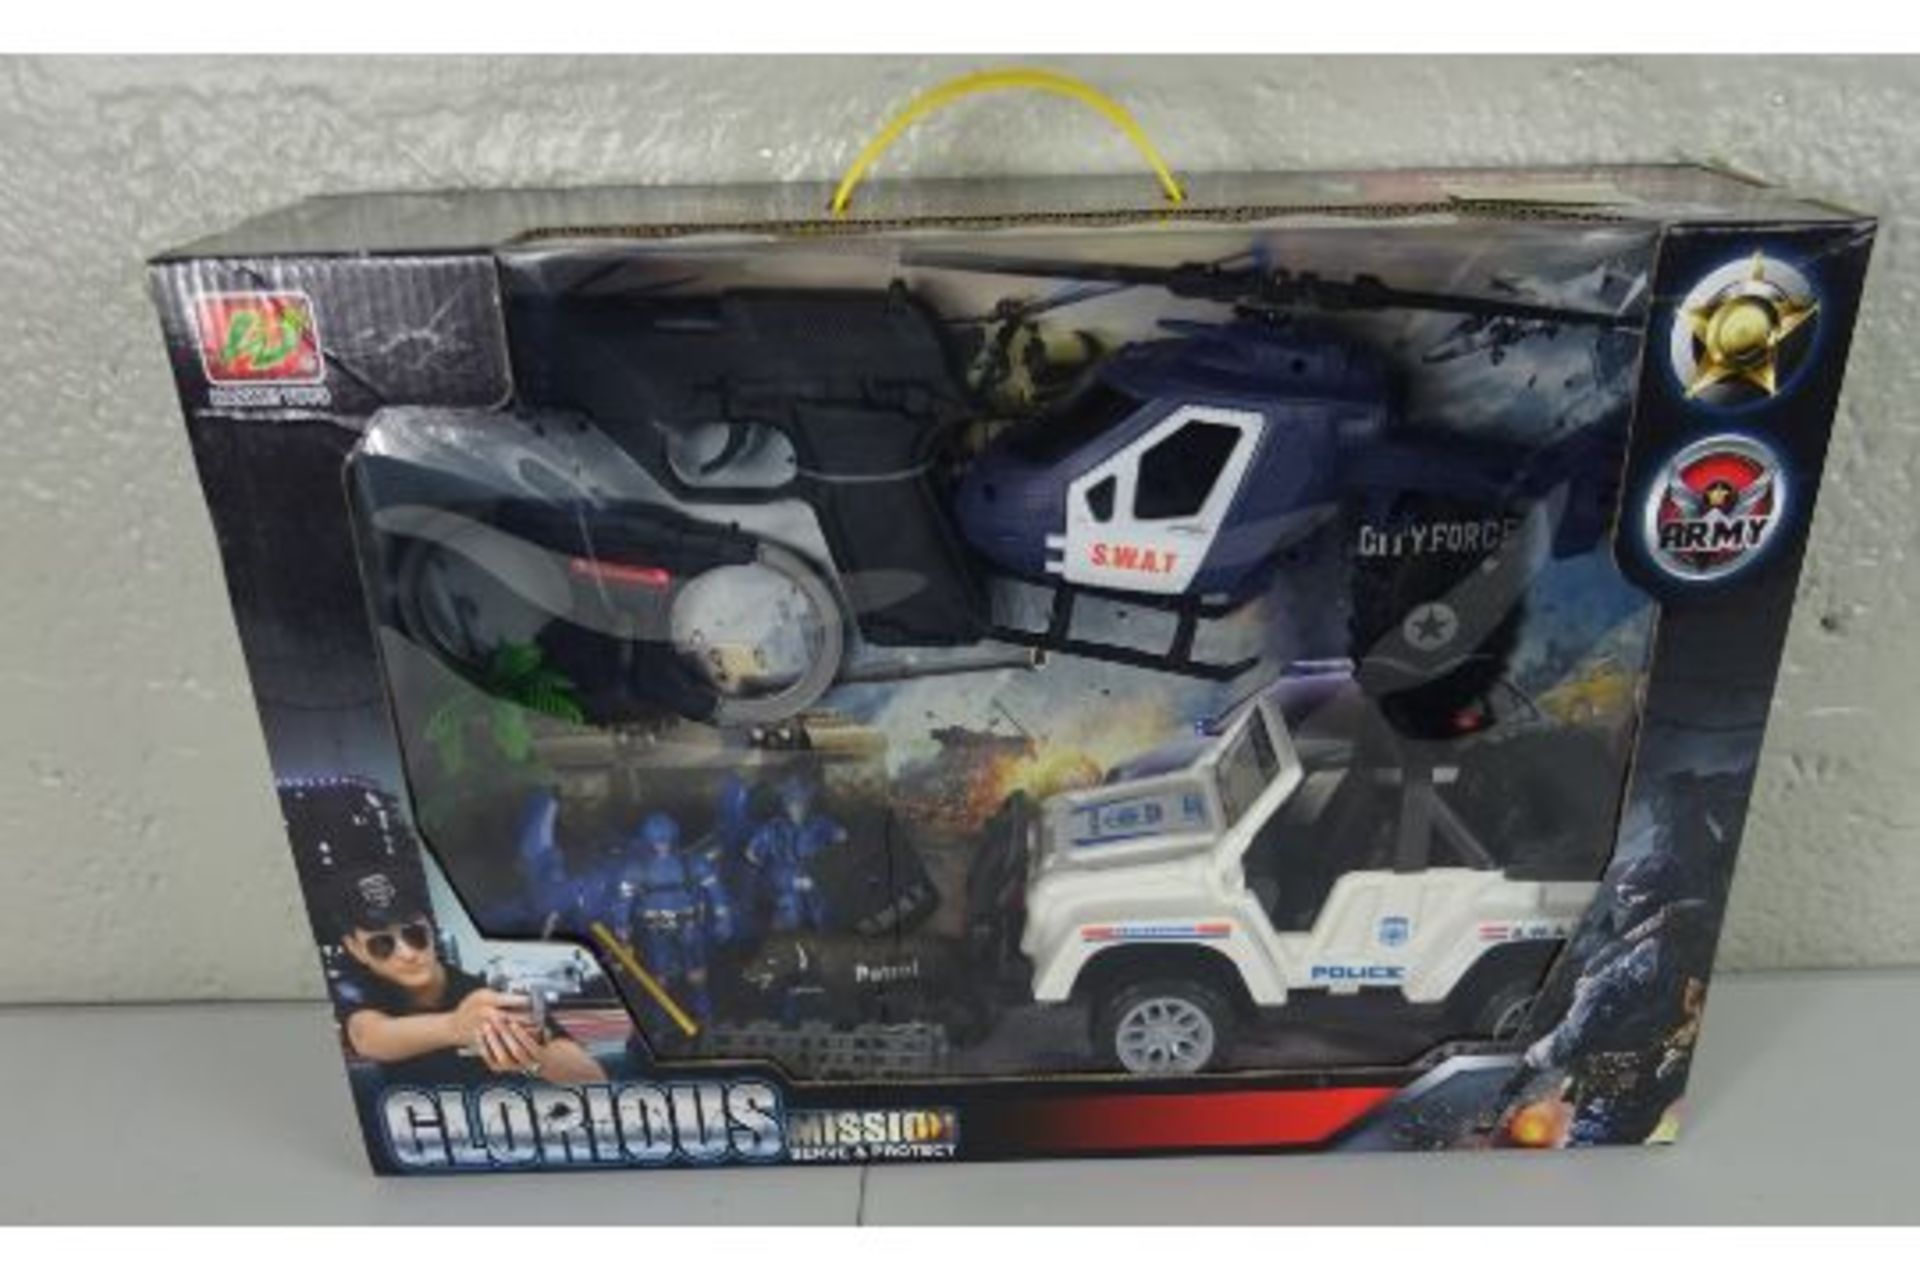 GLORIOUS MISSION SWAT SERVE AND PROTECT TOY